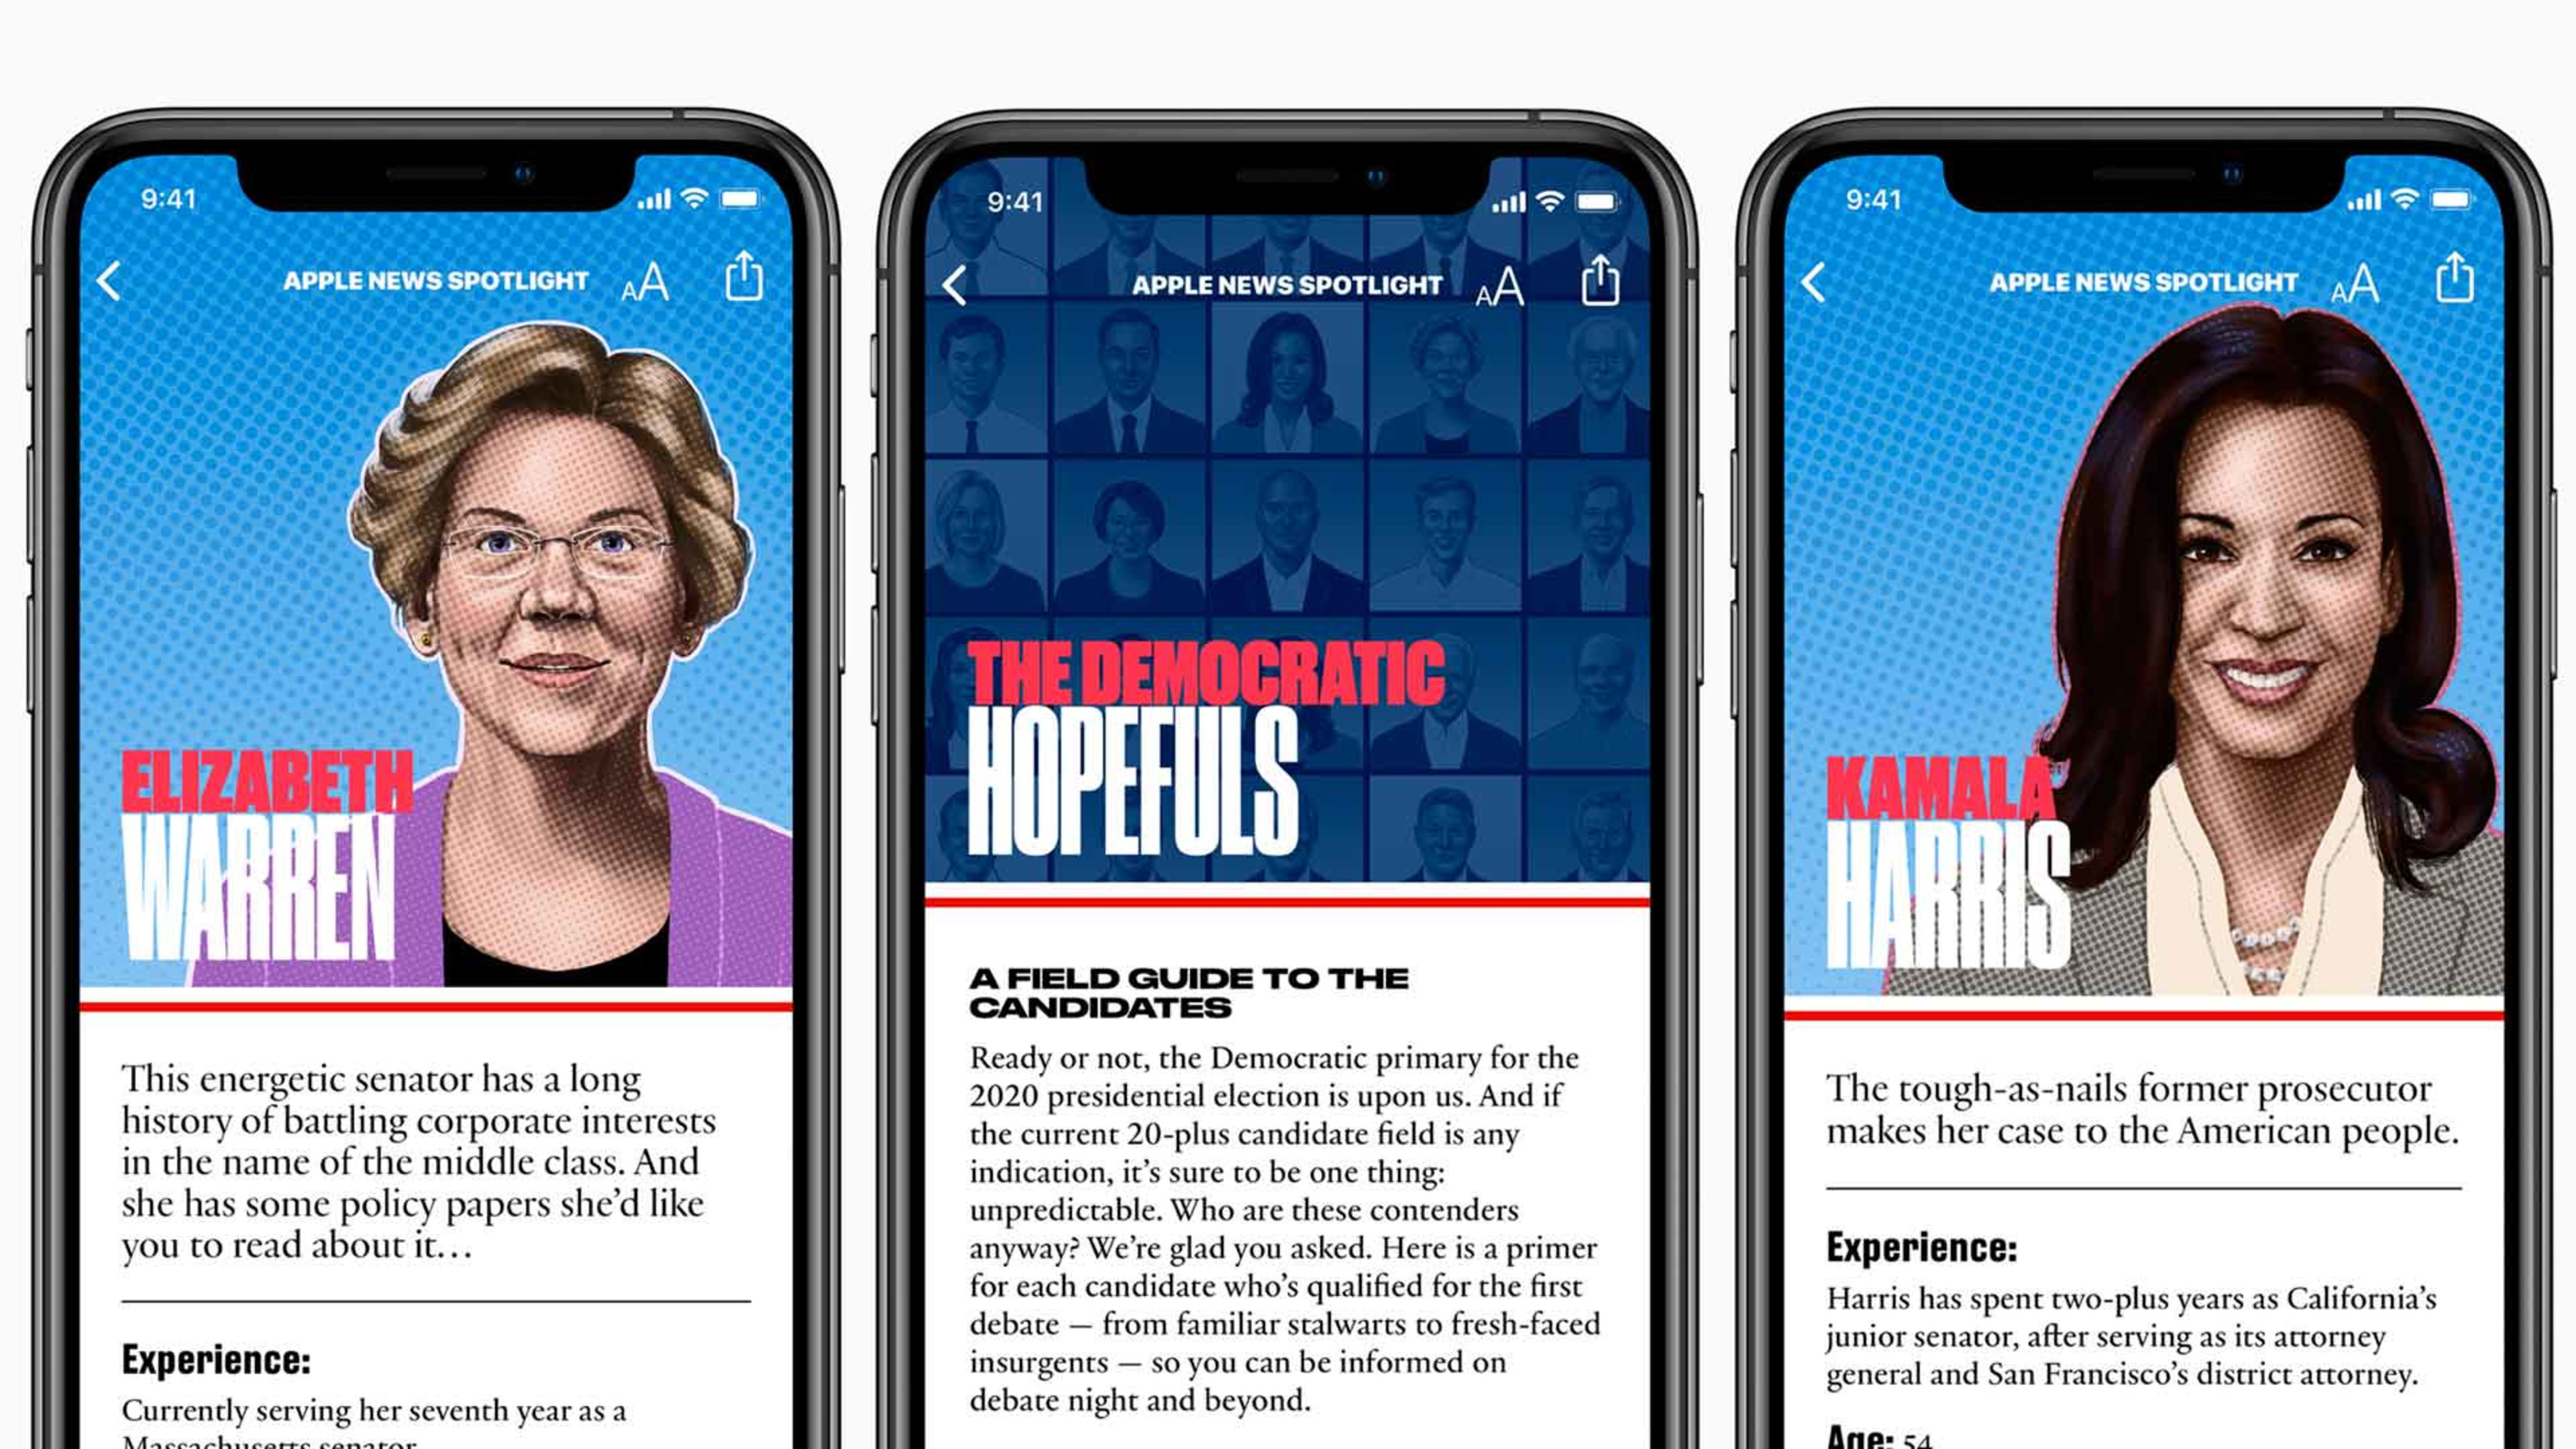 Apple just launched a guide to the 2020 Democratic presidential candidates